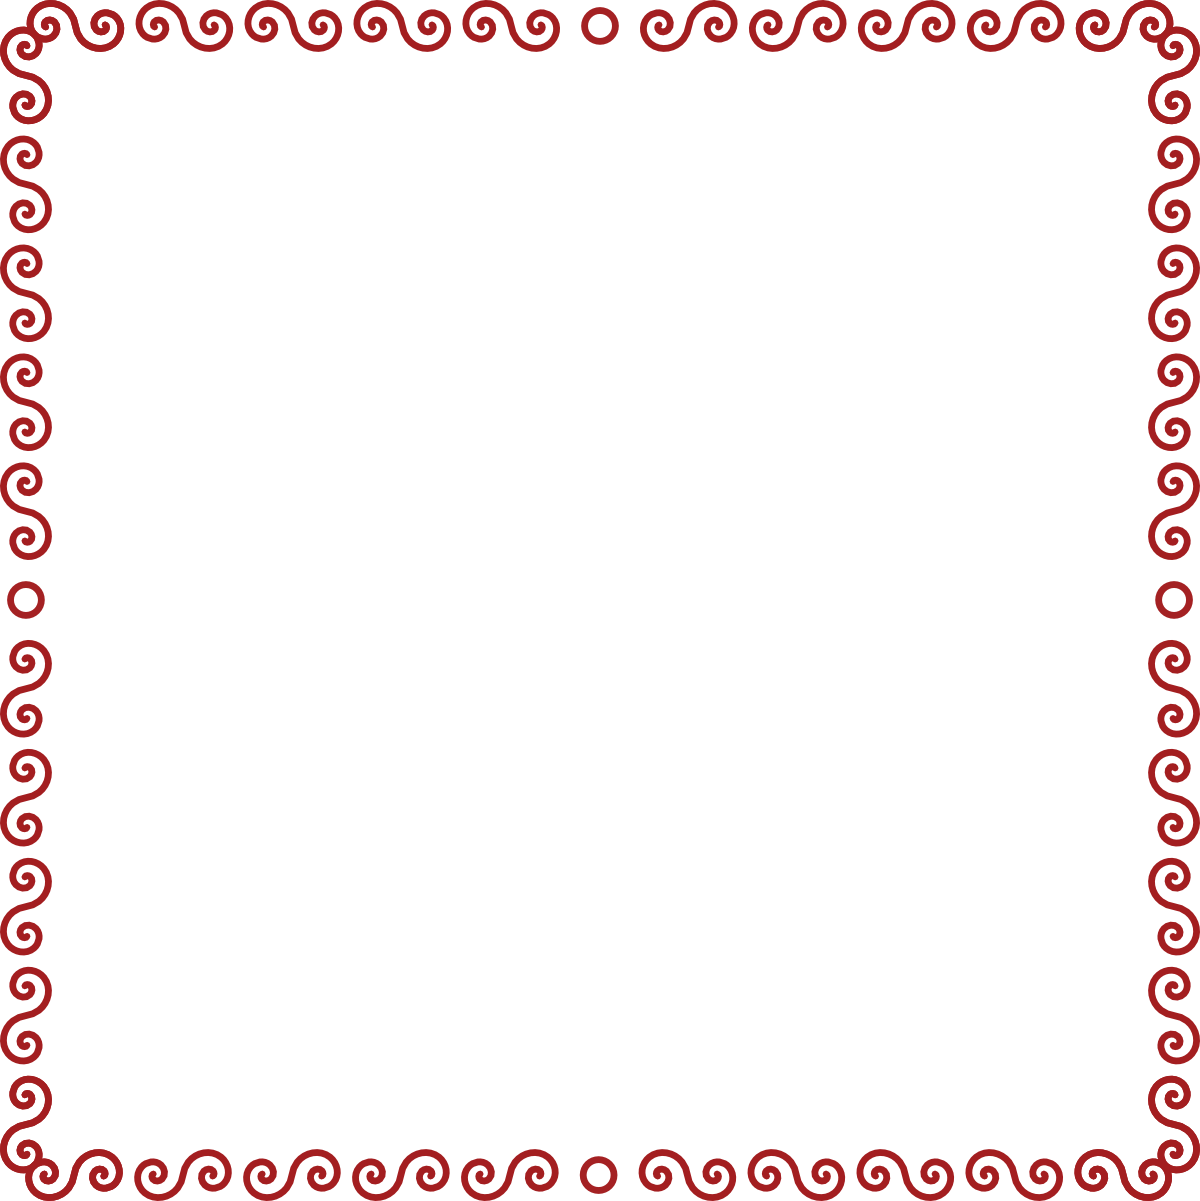 Free Red Swirl Border Clipart